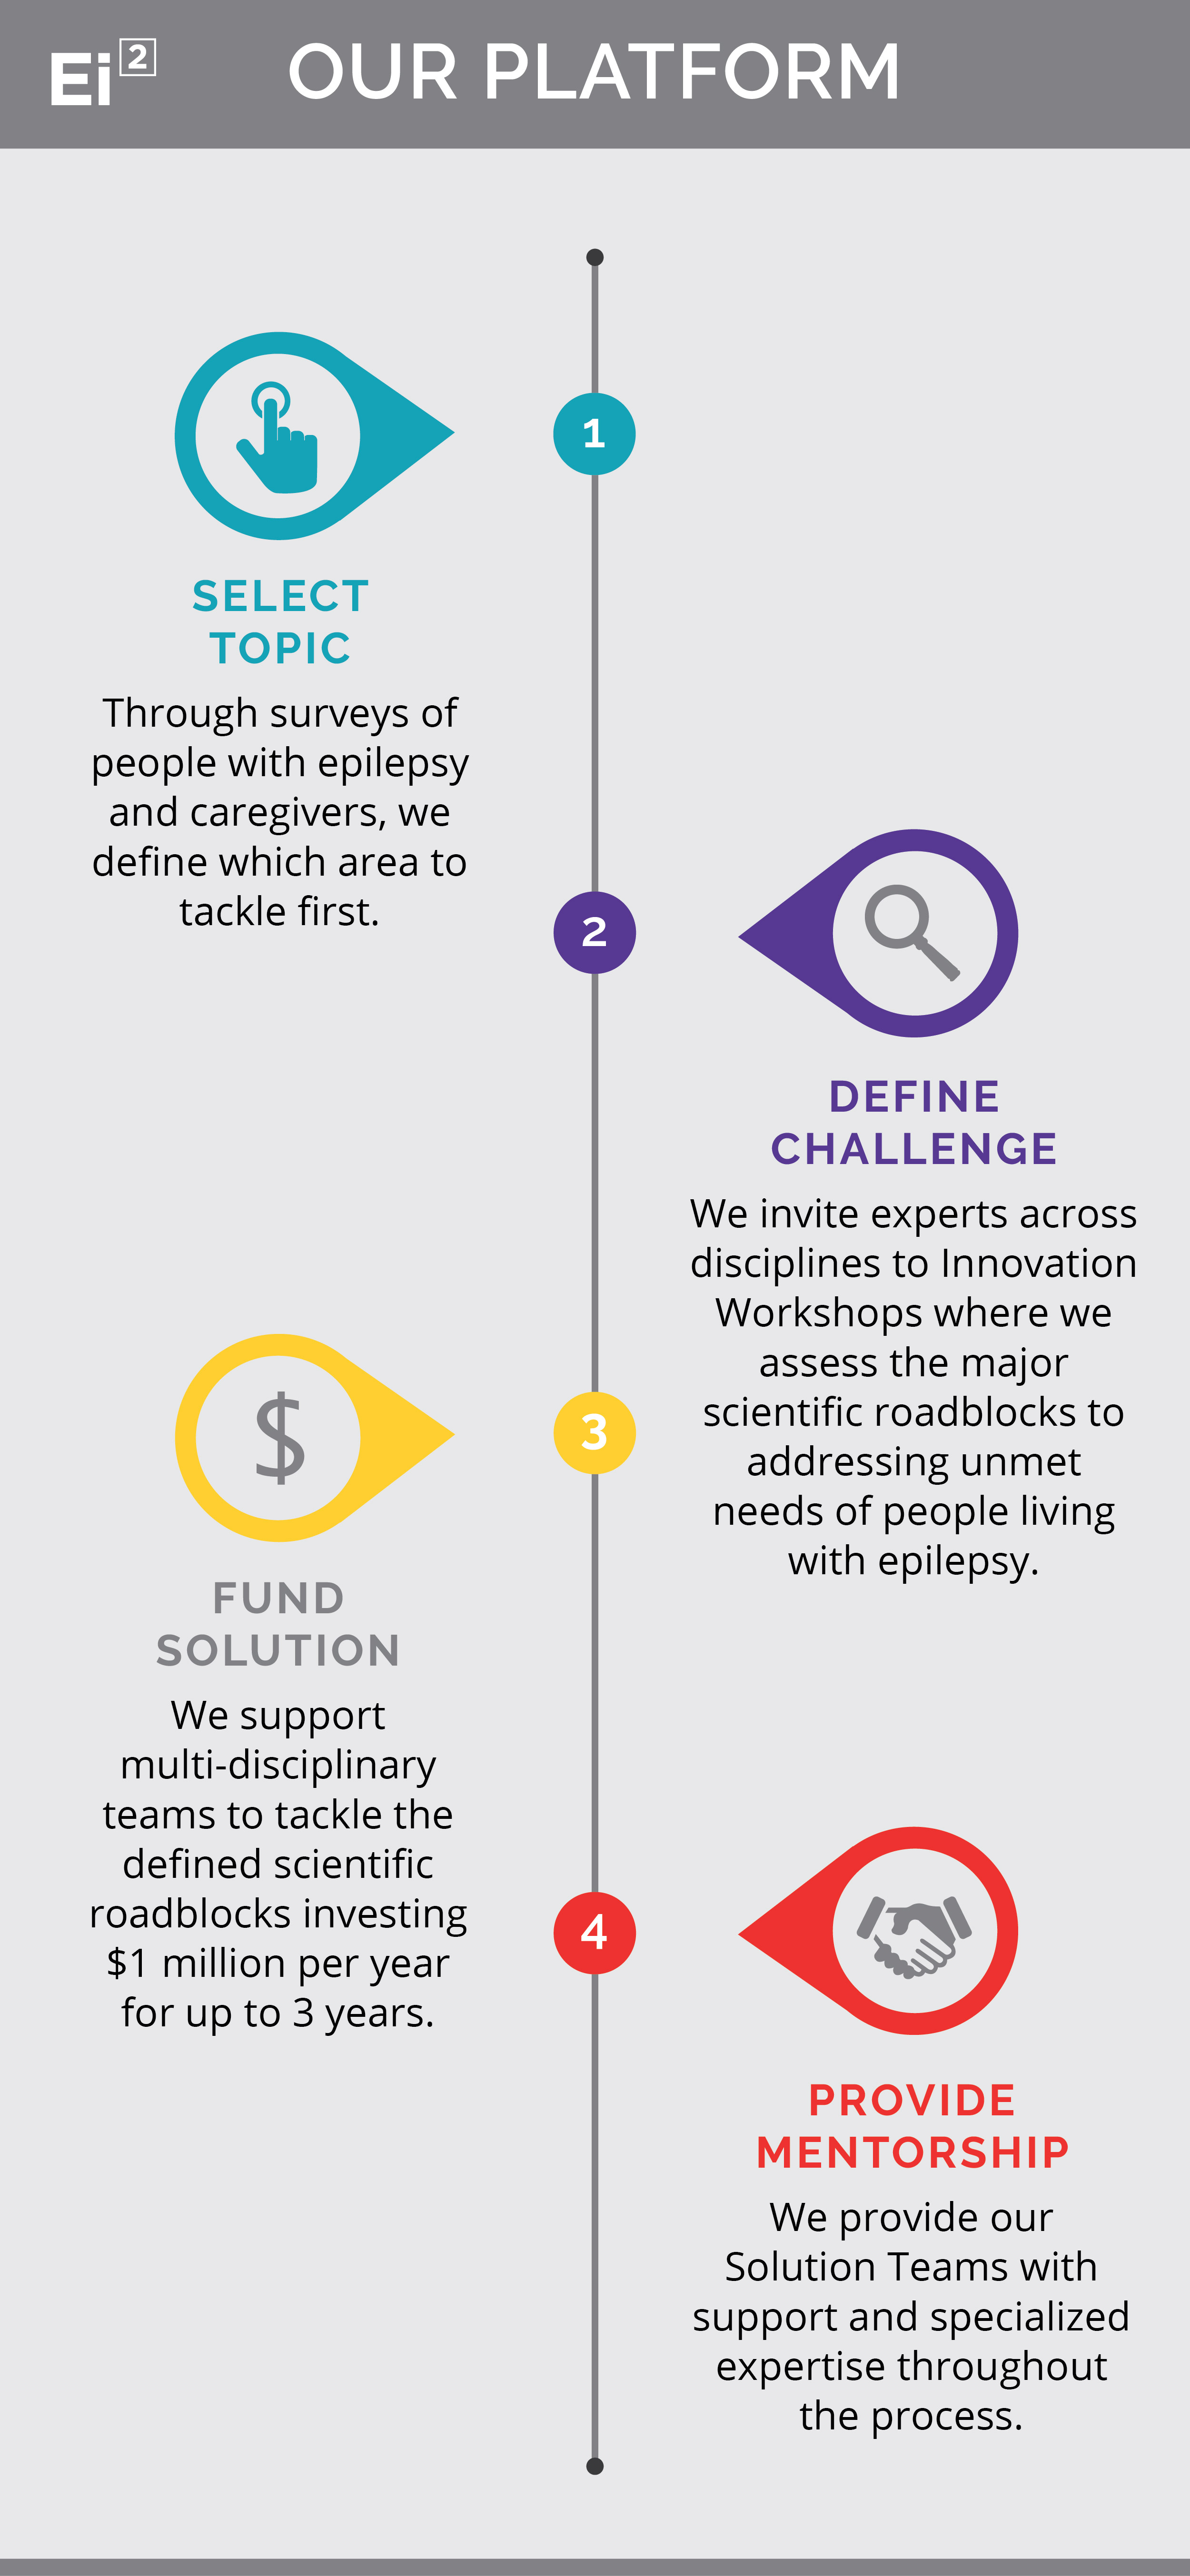 The Epilepsy Innovation Institute's Platform. First, we select a topic. Through patient and caregiver surveys, we define which areas to tackle first. Second, we define the challenge. Through Innovation Workshops bringing different disciplines together, we assess the major scientific roadblocks to addressing the unmet needs of people living with epilepsy. Third, we fund solutions. We support multi-disciplinary teams to tackle the defined scientific roadblocks. One million dollars per year for up to three years. Fourth and finally, we provide mentorship. We provide our Solution Teams with support and specialized expertise throughout the process.